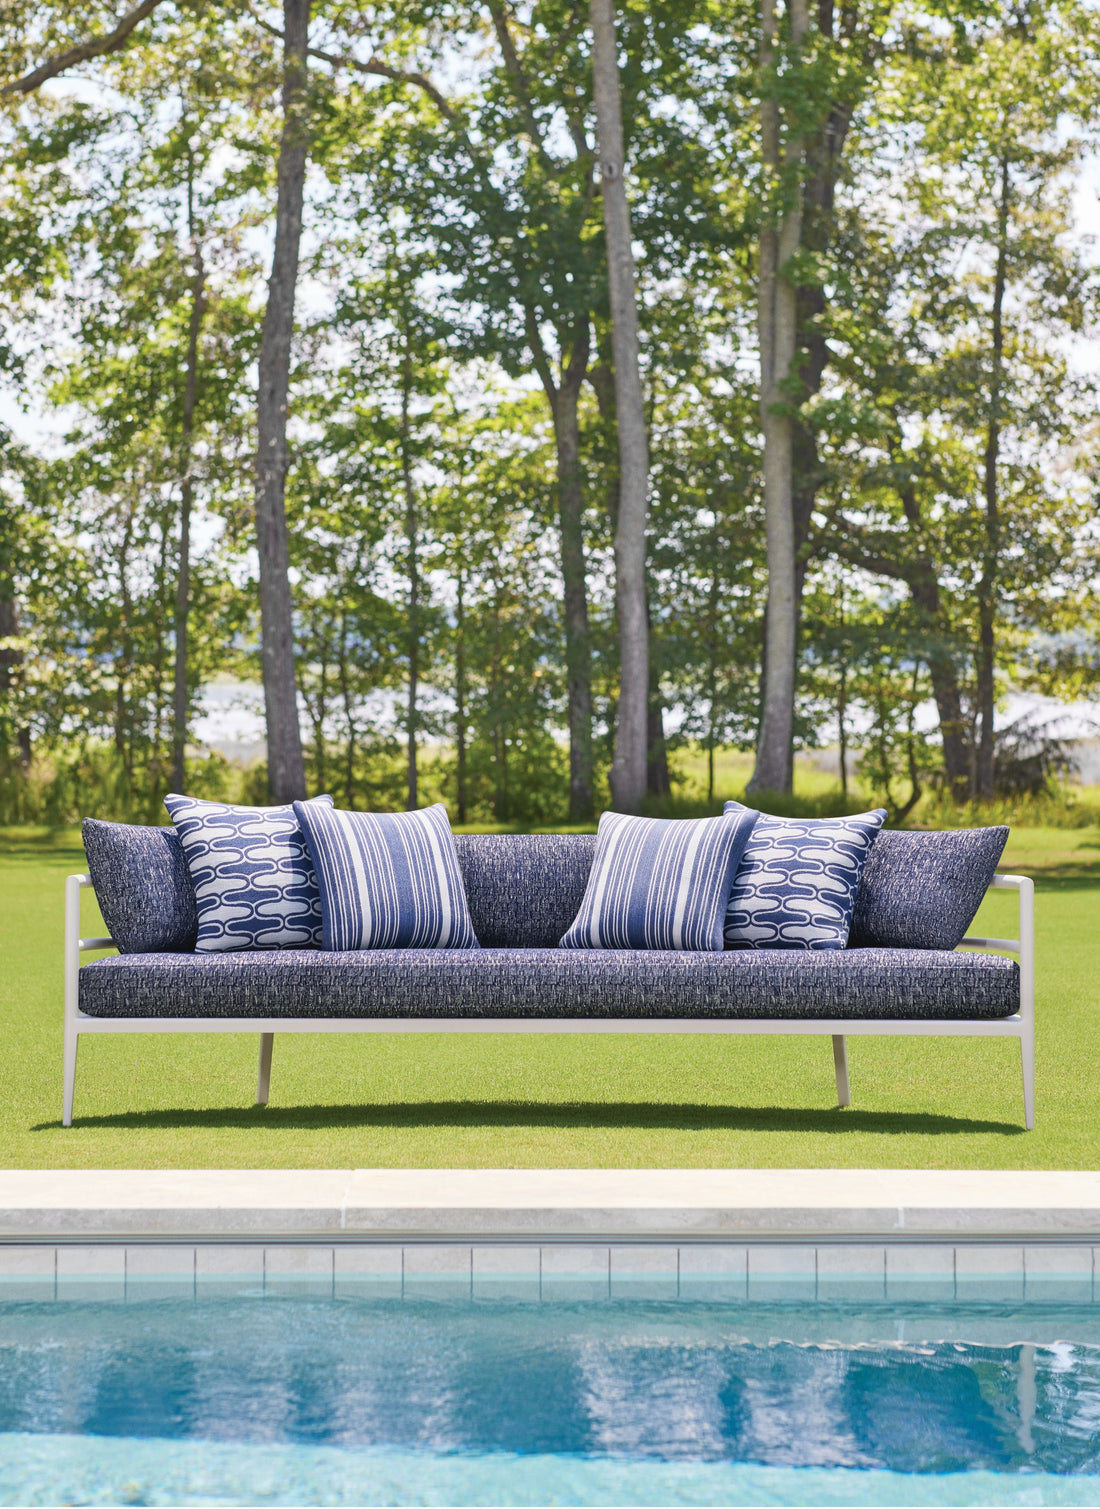 Chair cushion and end pillows in Cestino fabric in navy color - pattern number W8522 - by Thibaut in the Villa collection